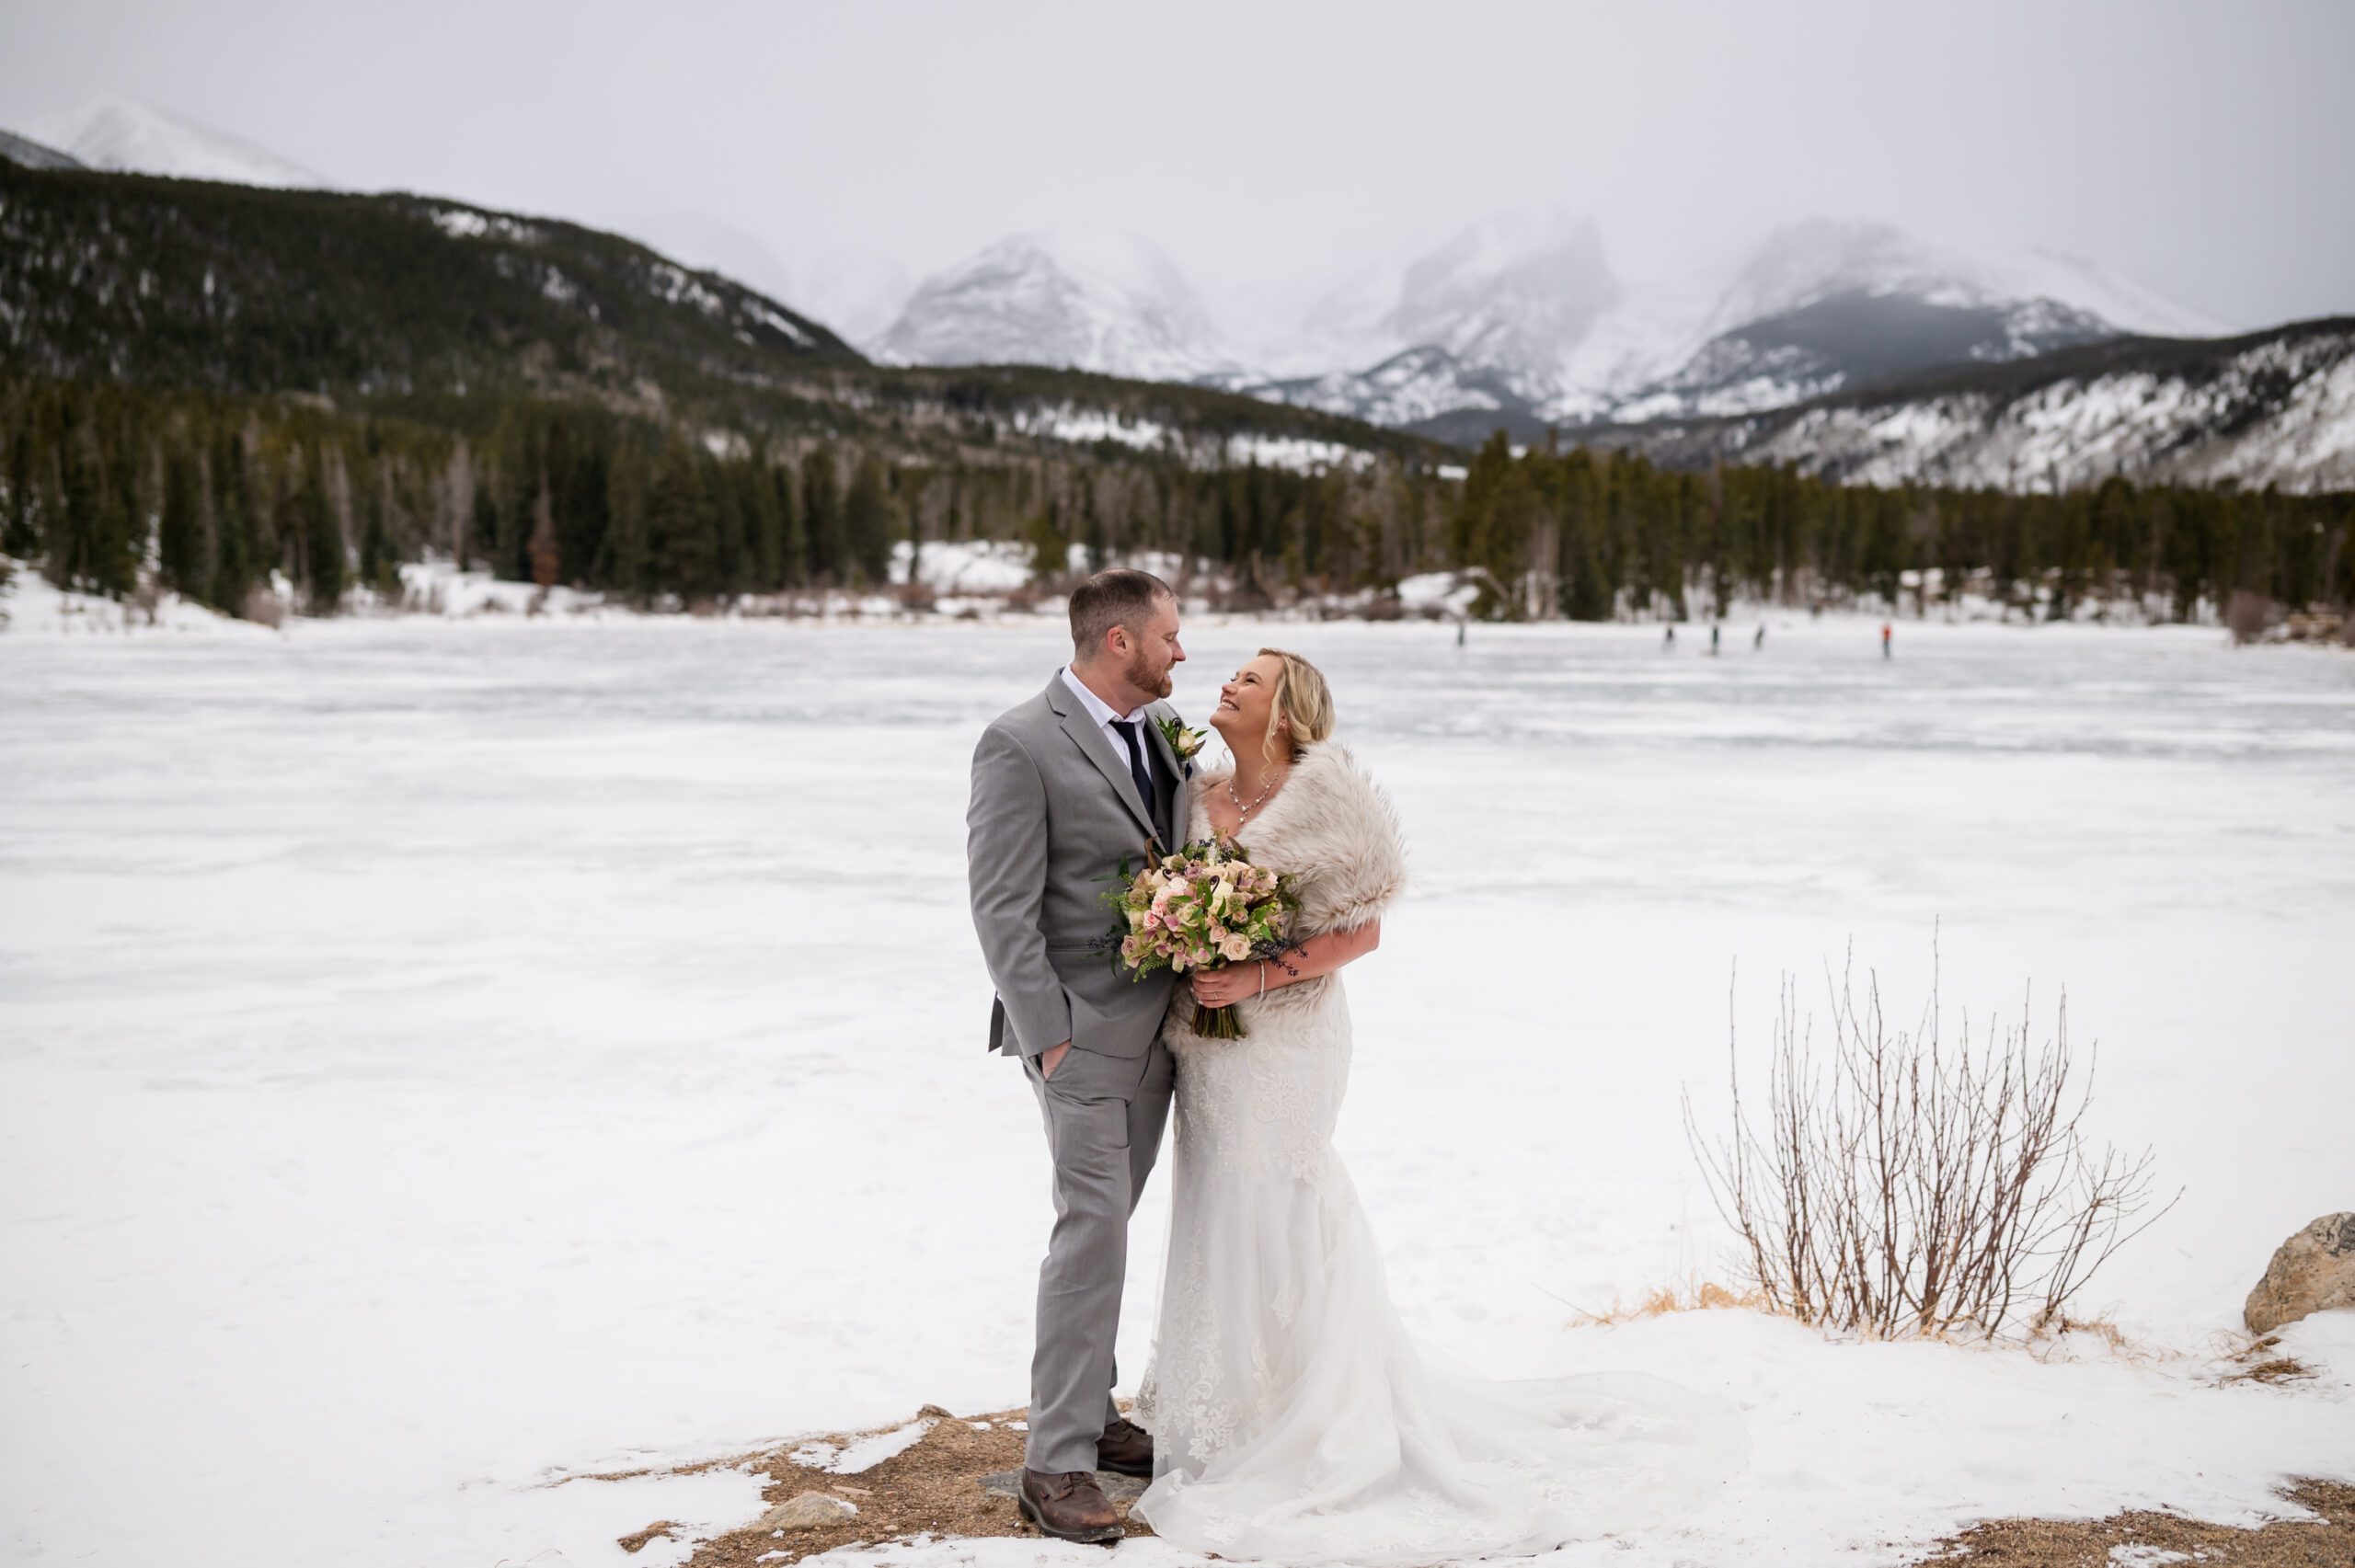 Bride and groom smiling at each other after their Winter Elopement at Sprague Lake.